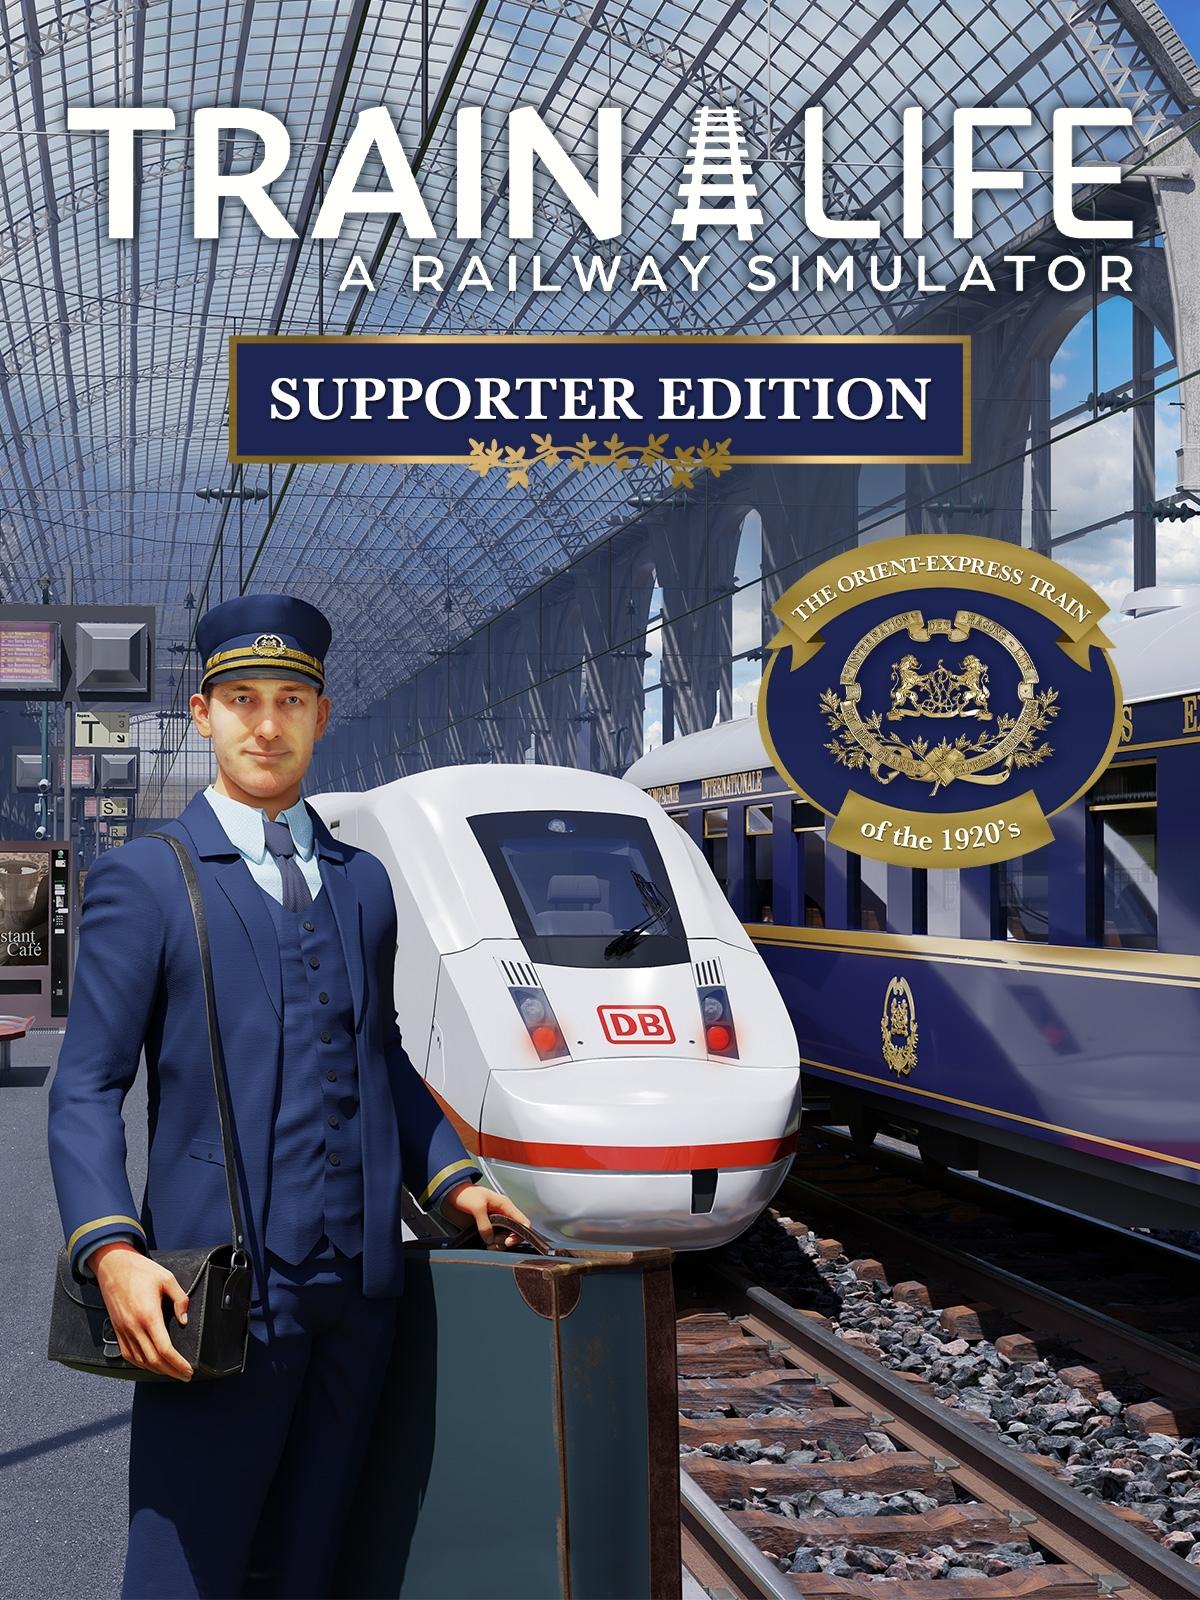 Train Life - Supporter Edition | Middle East (63384691-2120-4a75-8d1a-0a27f7c55c36)